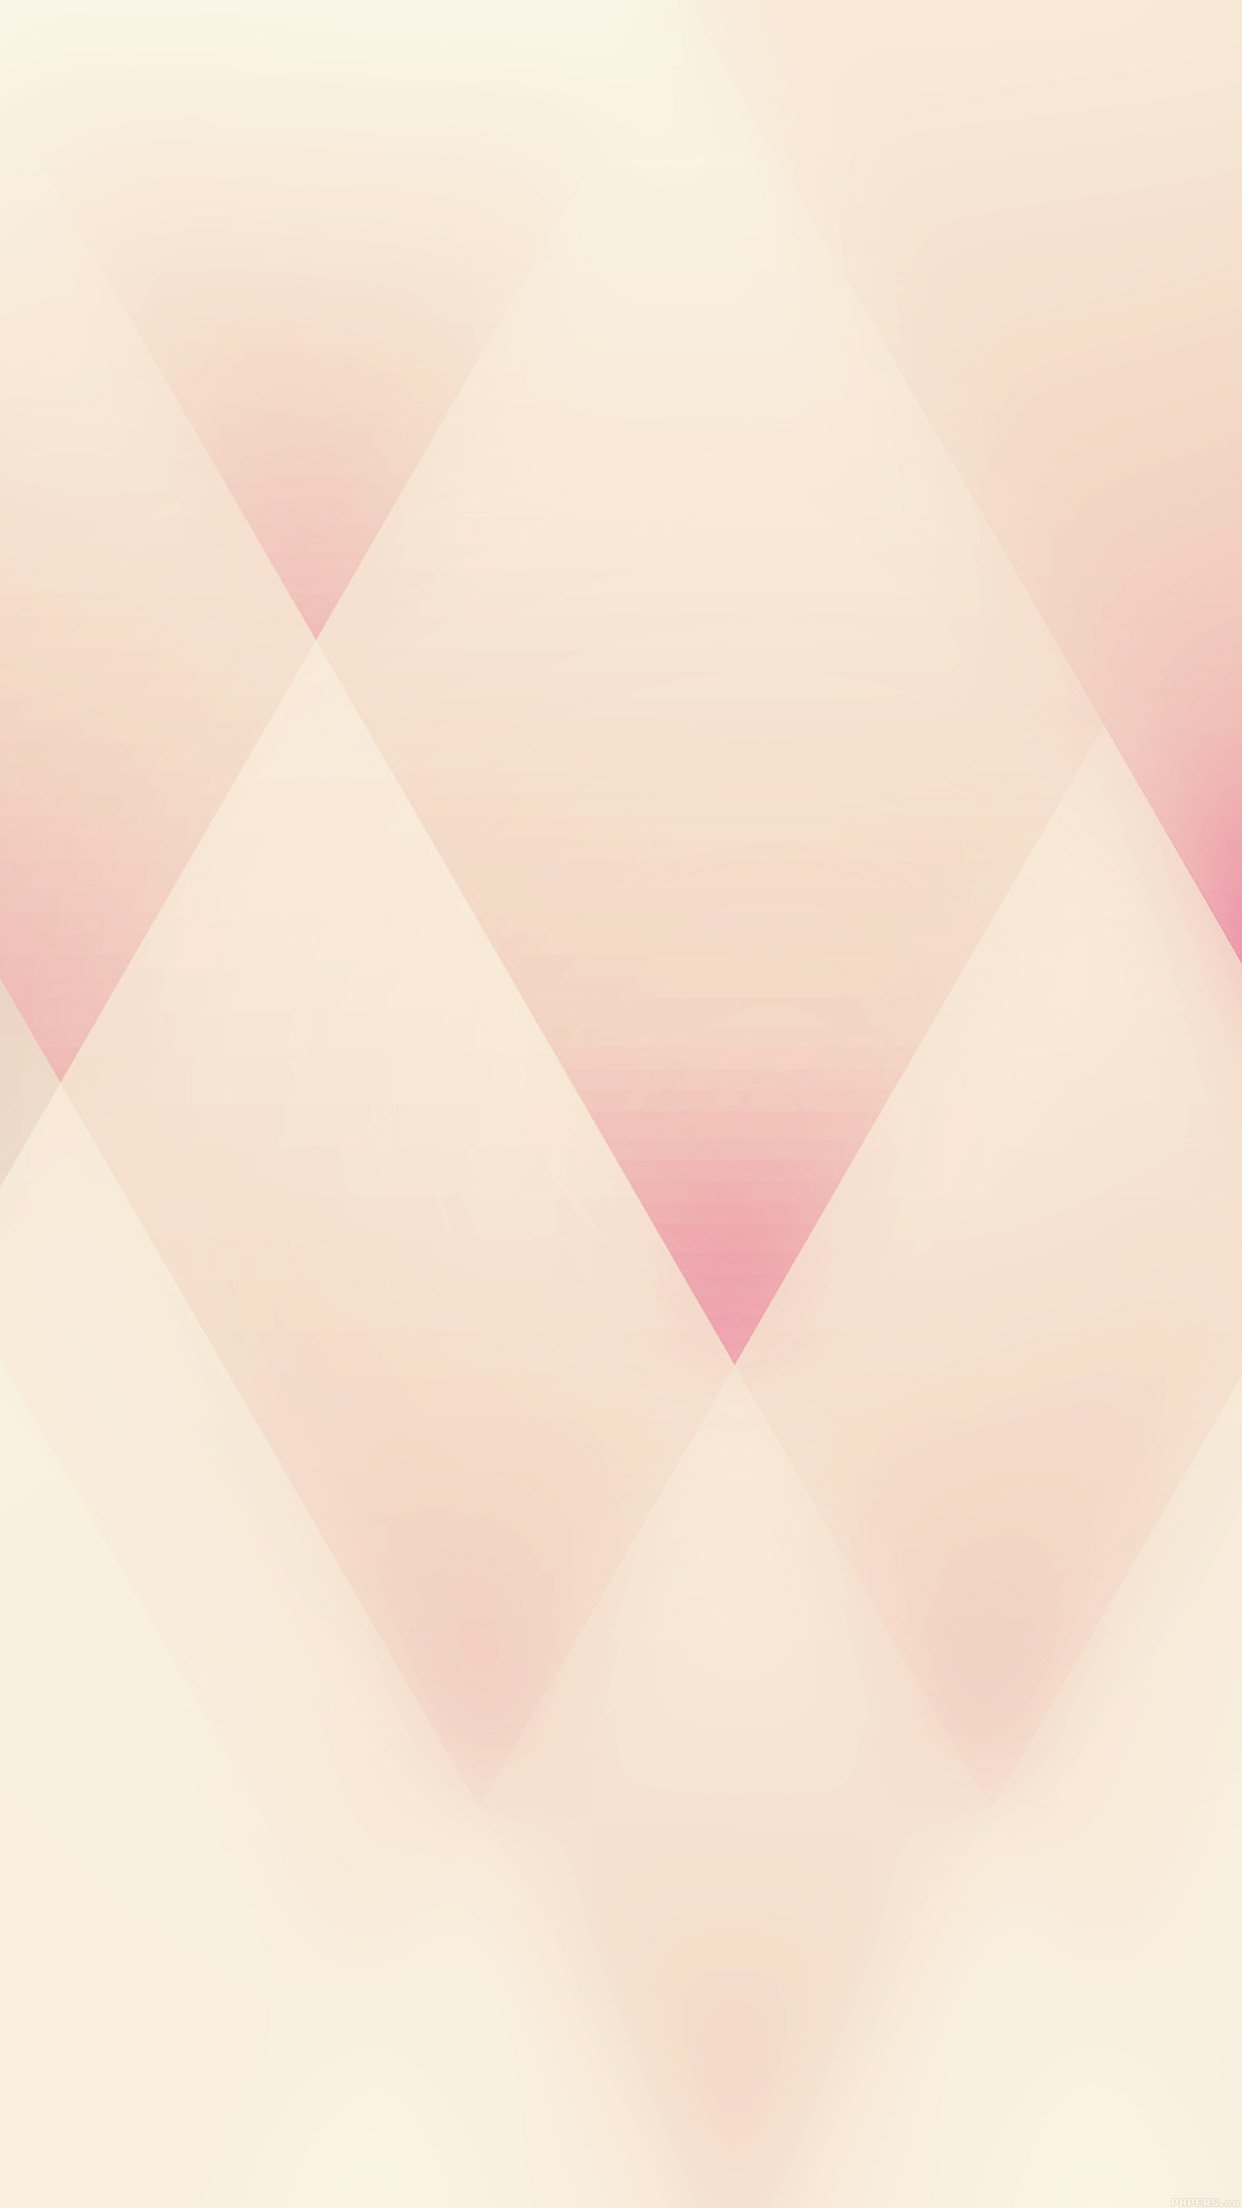 Soft Triangles Abstract Lovely Patterns Android wallpaper